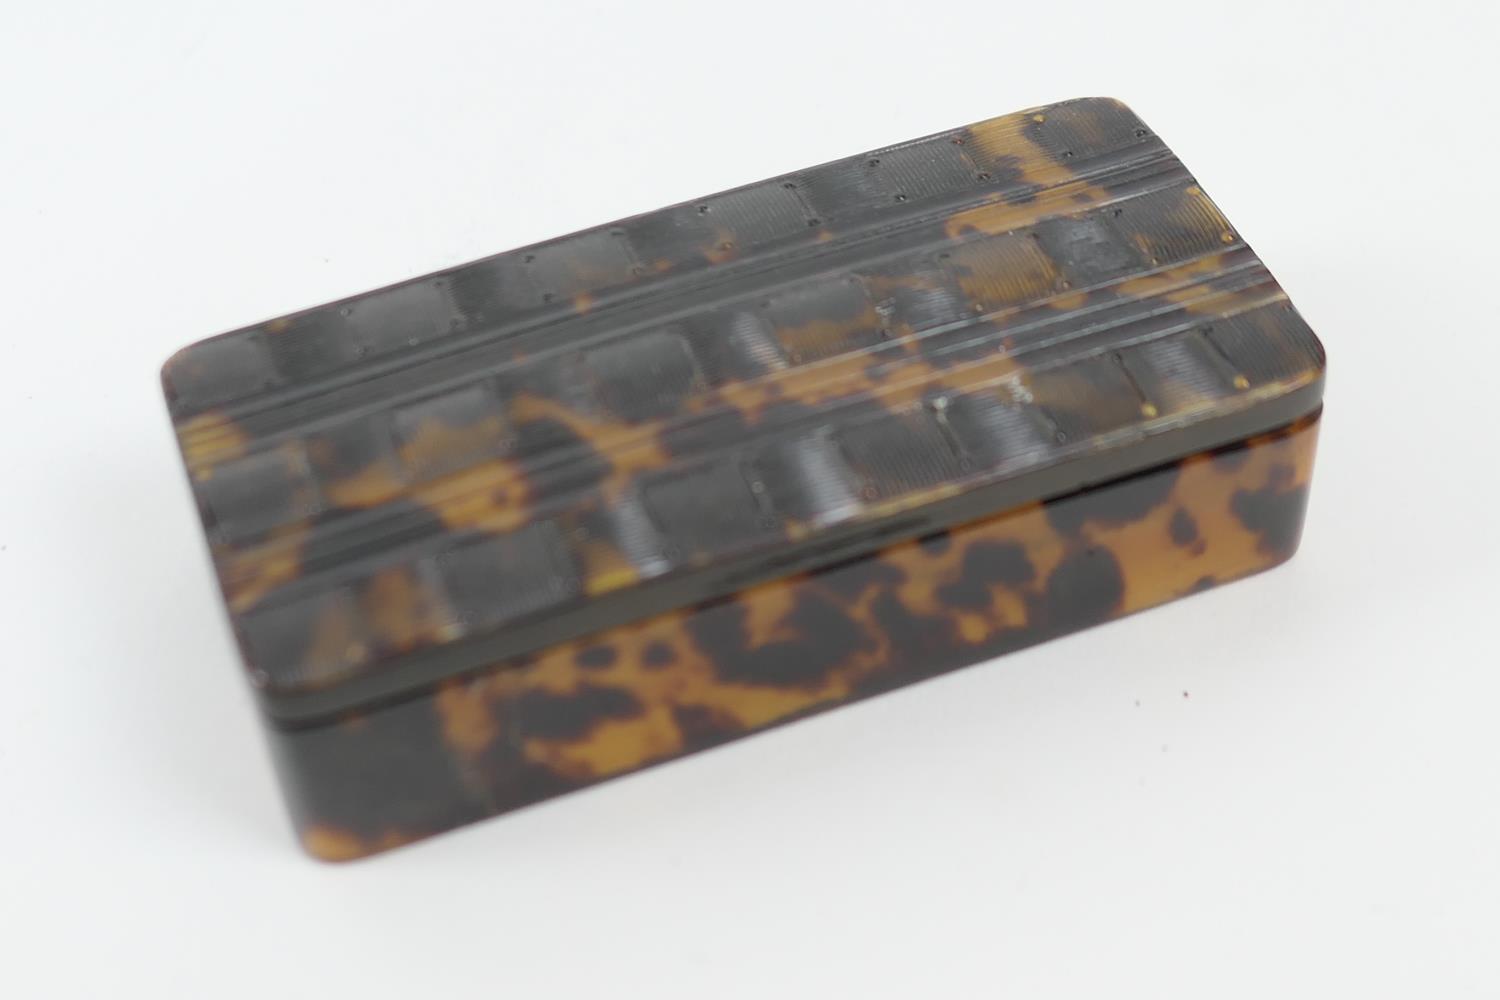 Tortoiseshell snuff box, early 19th Century, rectangular form, the cover pressed with chequerboard